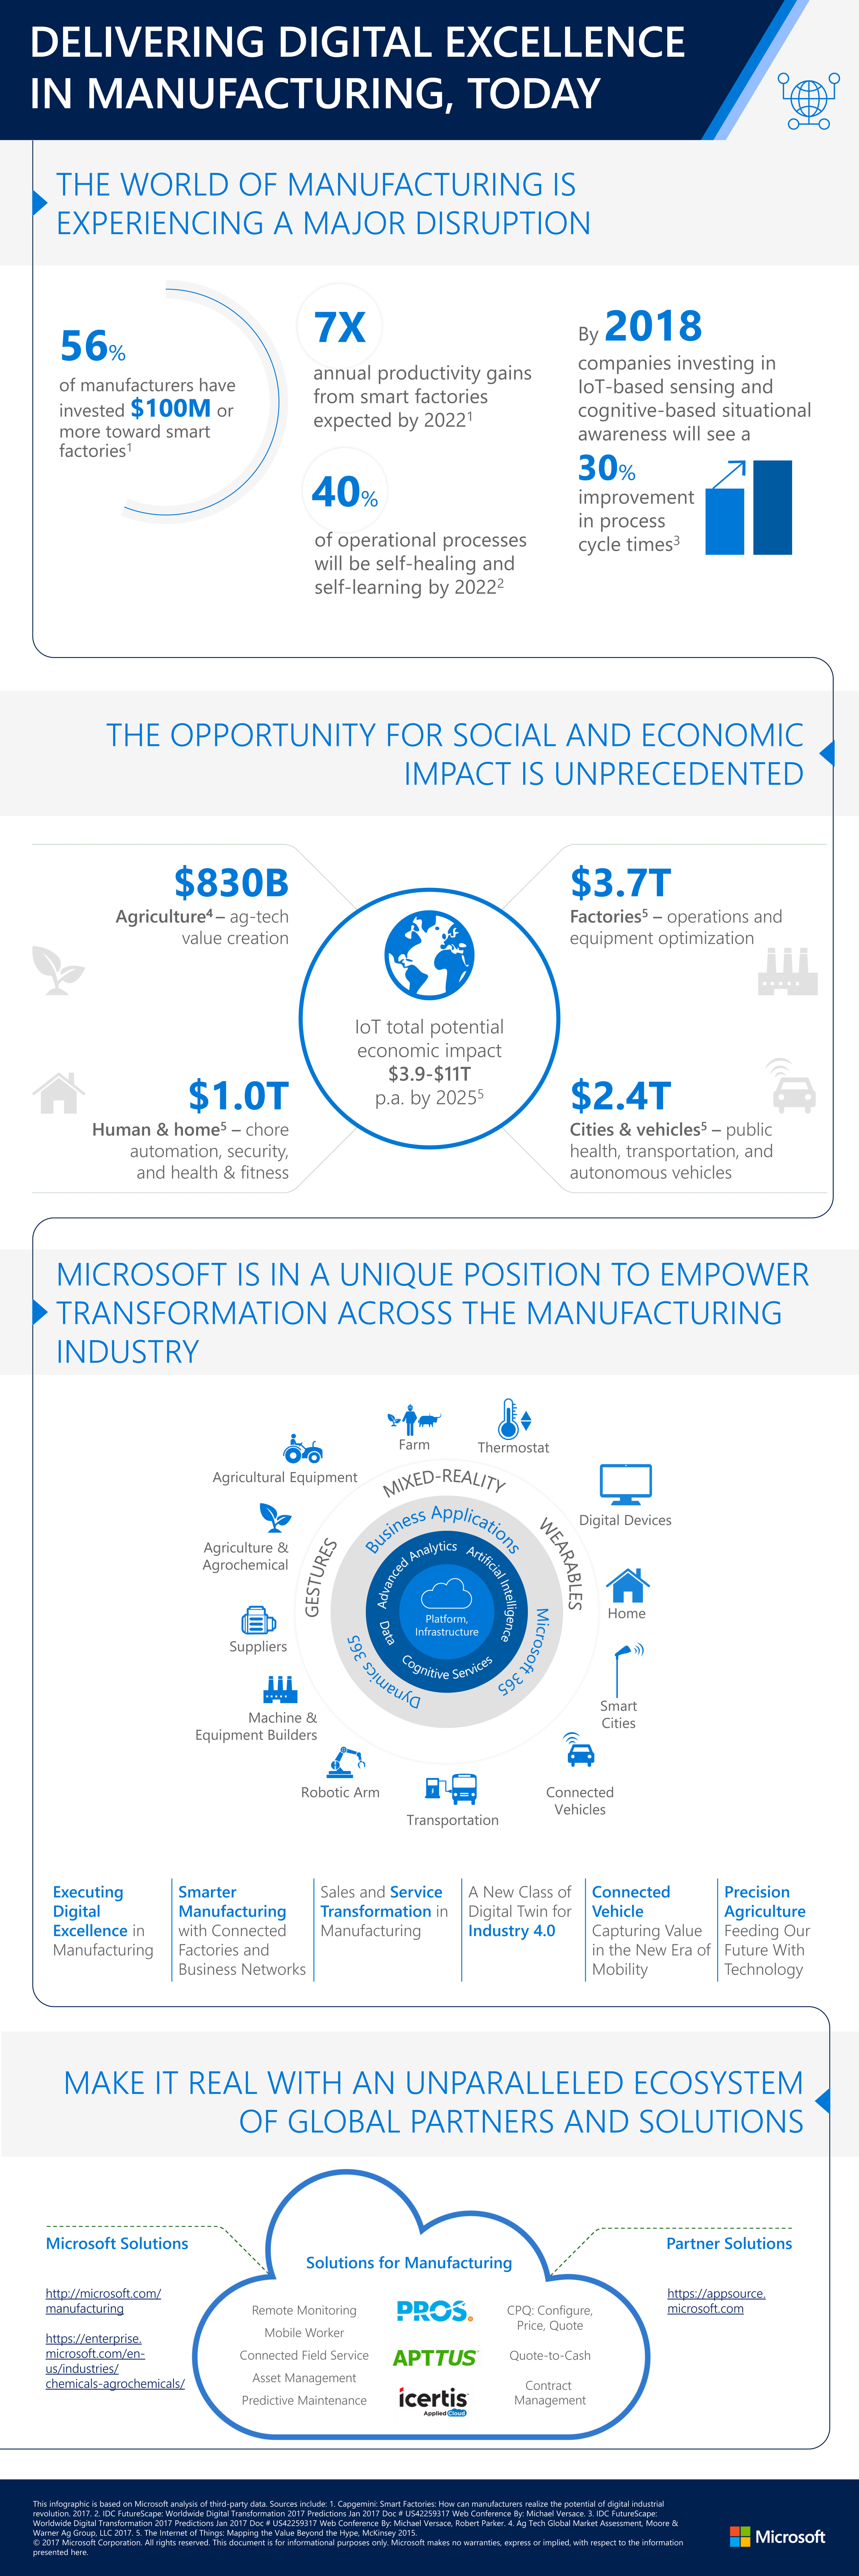 Delivering digital excellence in manufacturing, today- infographic